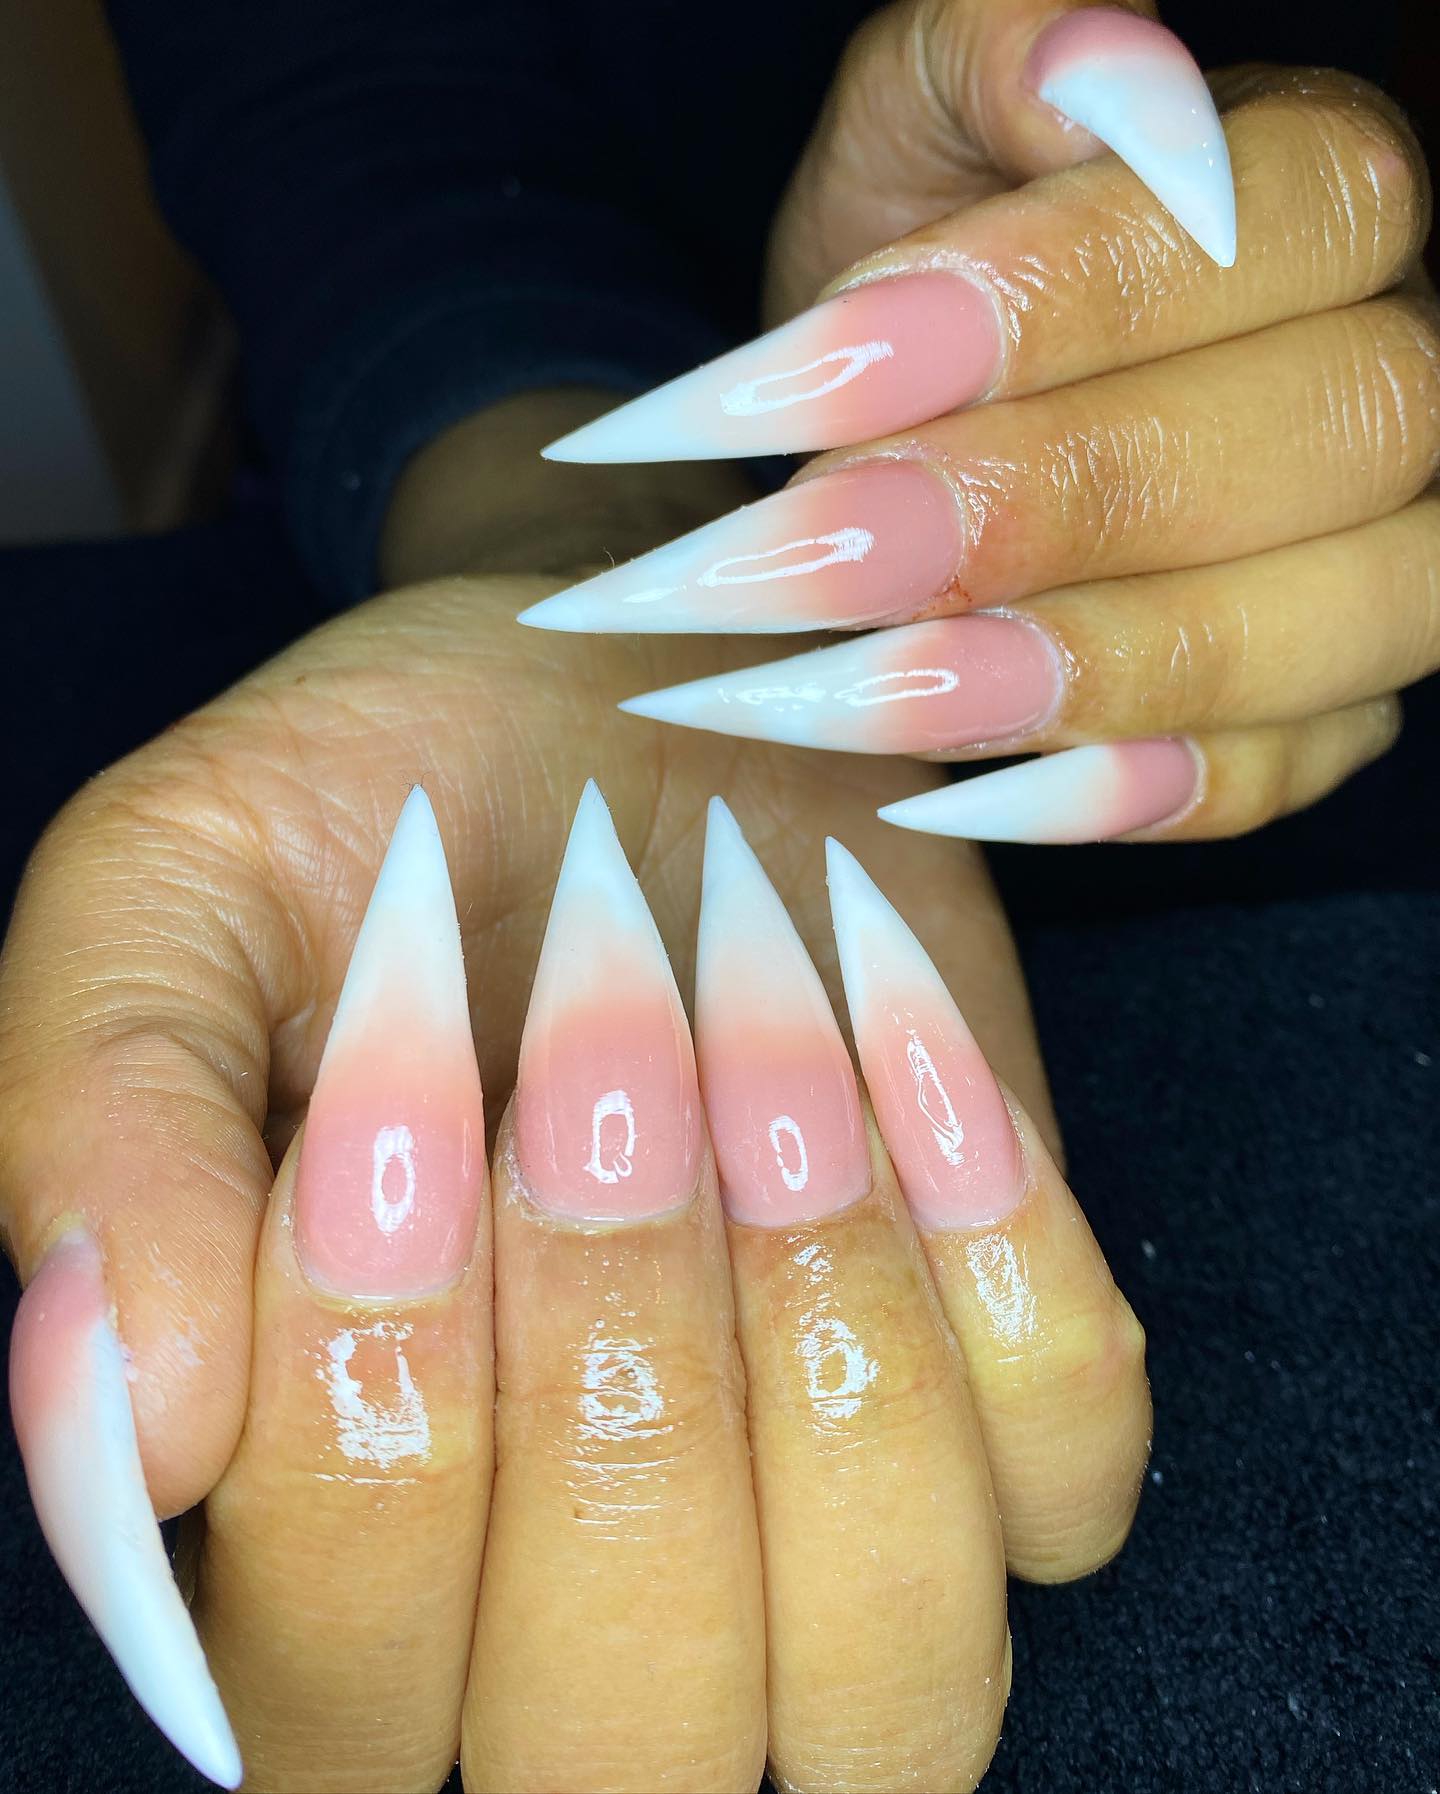 Being claw-like nail design, stiletto nails can make you feel like you are bold and you are in charge. To give these bold nails a different look, you should go for a pink and white ombre nail design.